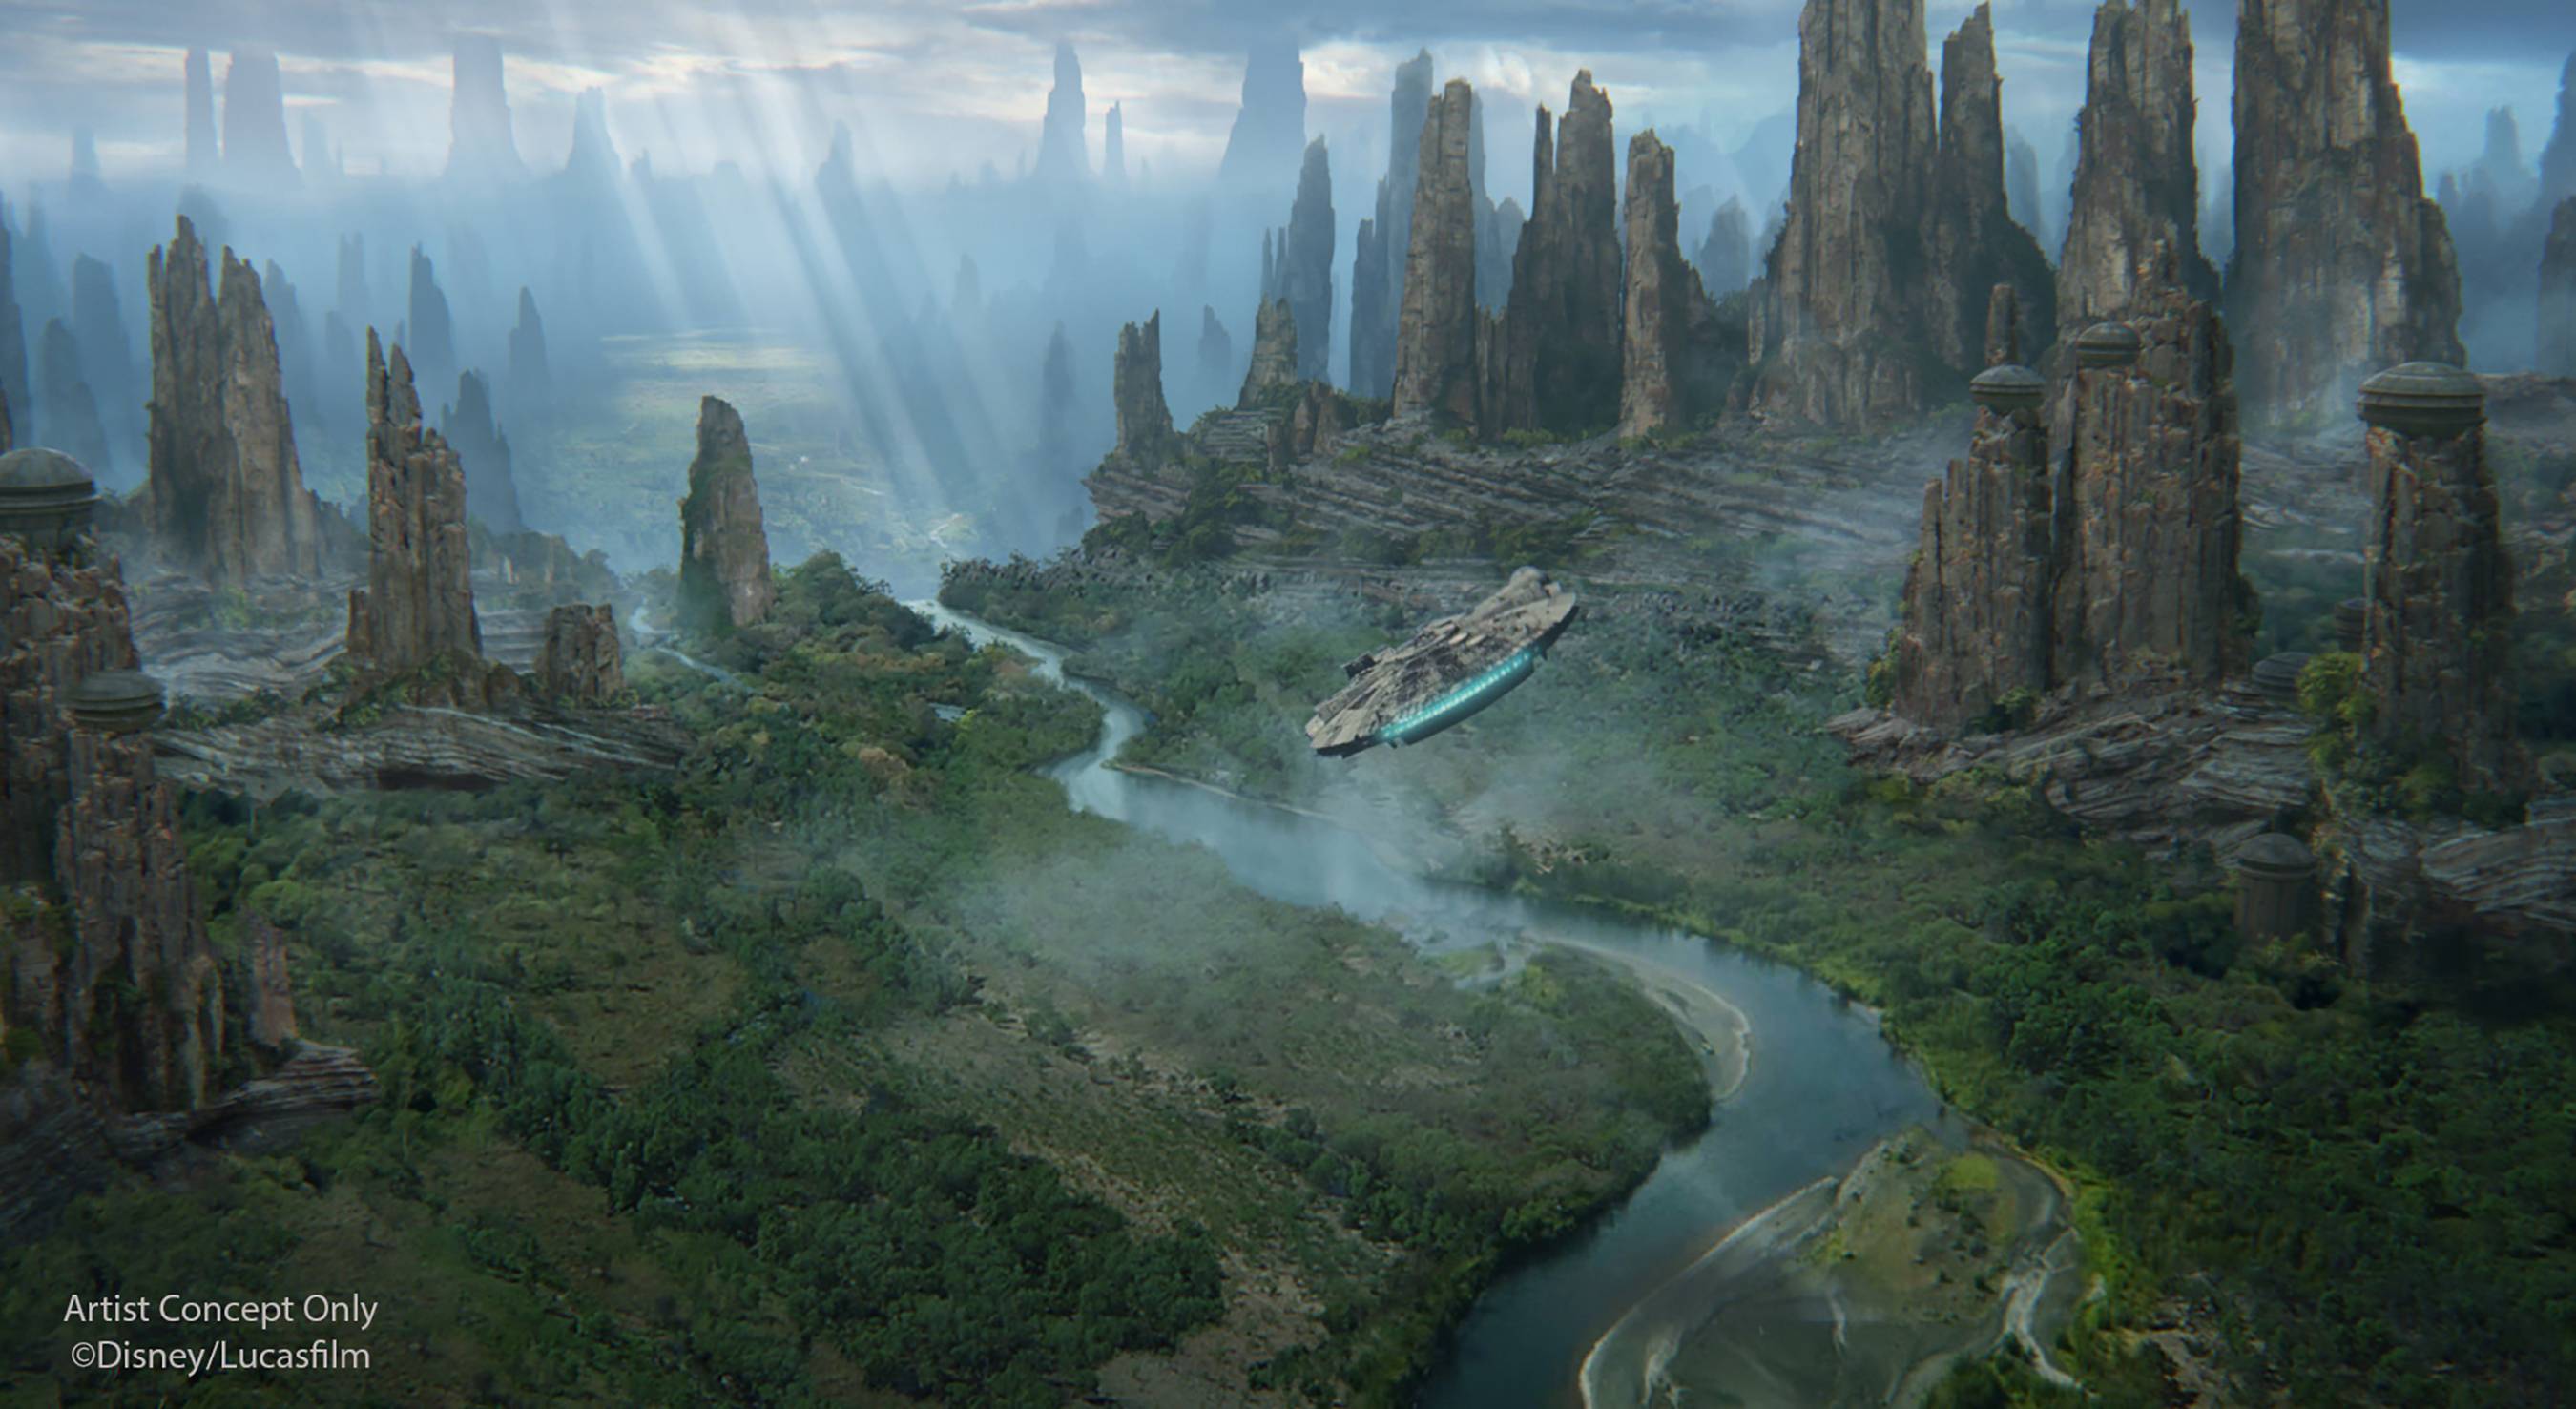 PHOTOS - New Star Wars Galaxy's Edge concept art shows Black Spire Outpost